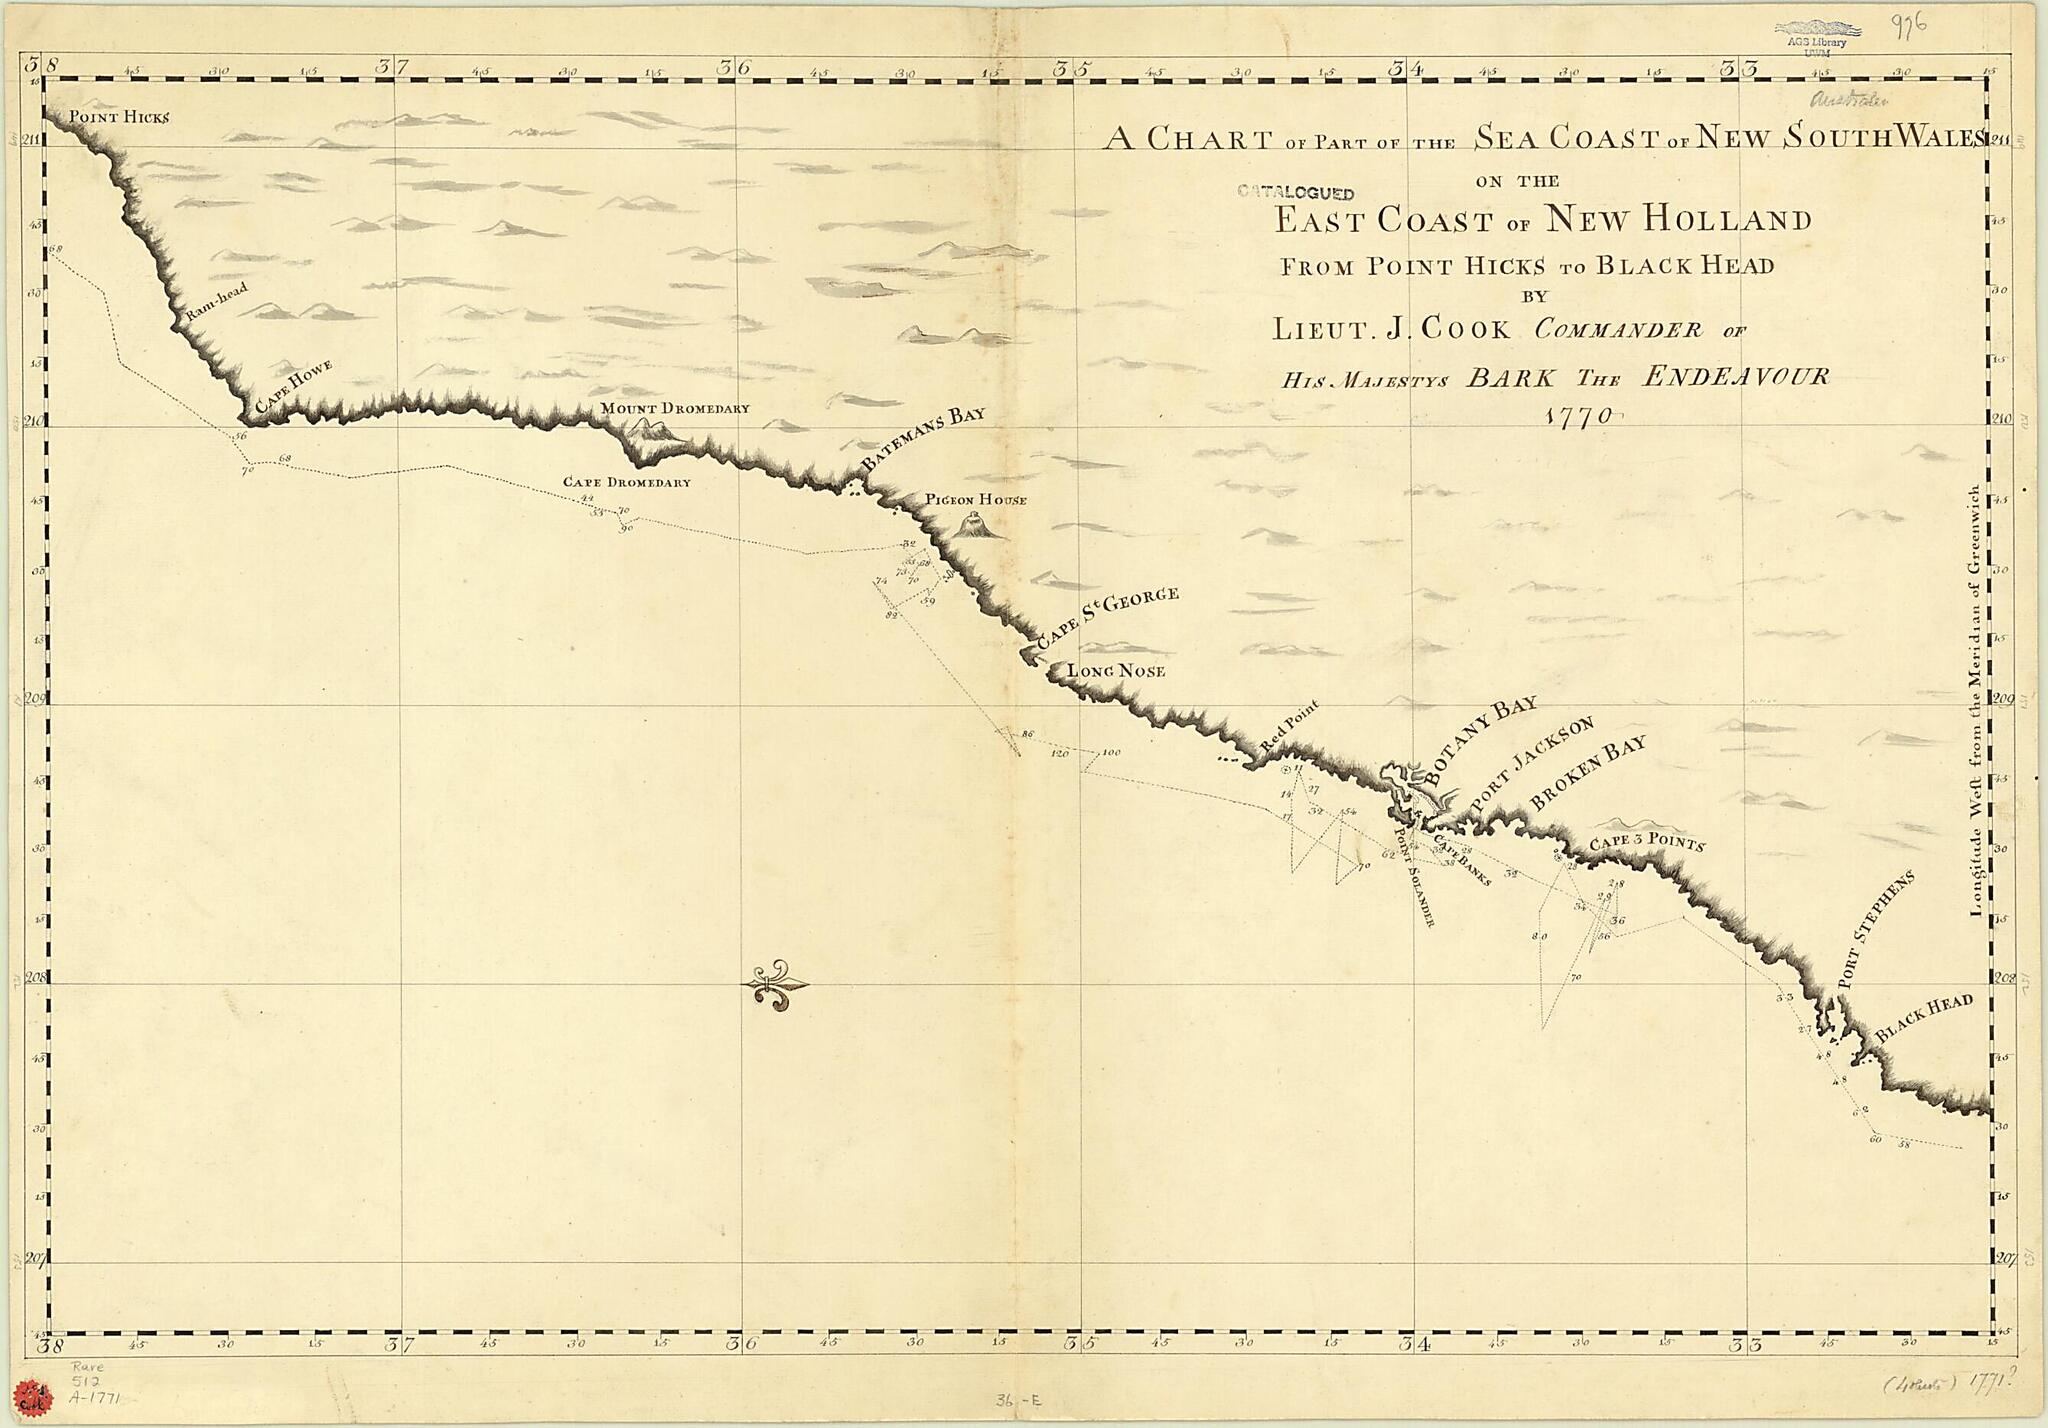 This old map of A Chart of Part of the Sea Coast of New South Wales On the East Coast of New Holland from Point Hicks to Black Head from 1771 was created by James Cook in 1771